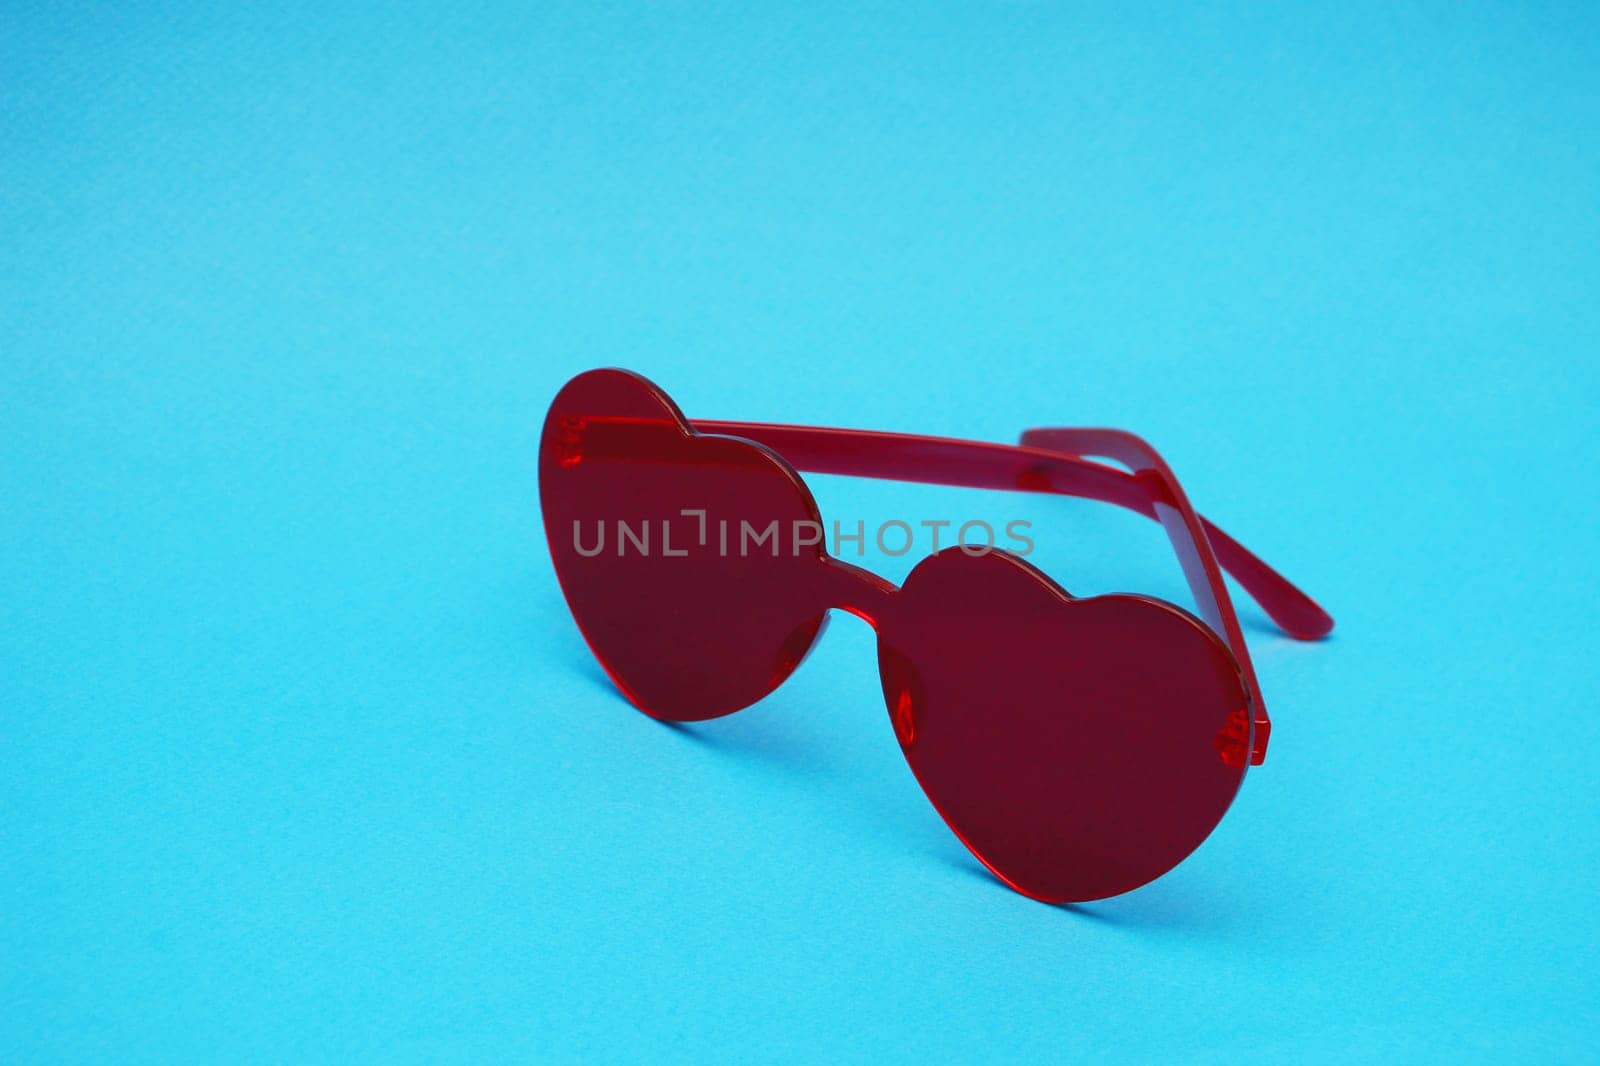 Red sunglasses in the shape of a heart on a blue background. ..Elegant red plastic glasses in the shape of a heart on a blue paper background close-up.